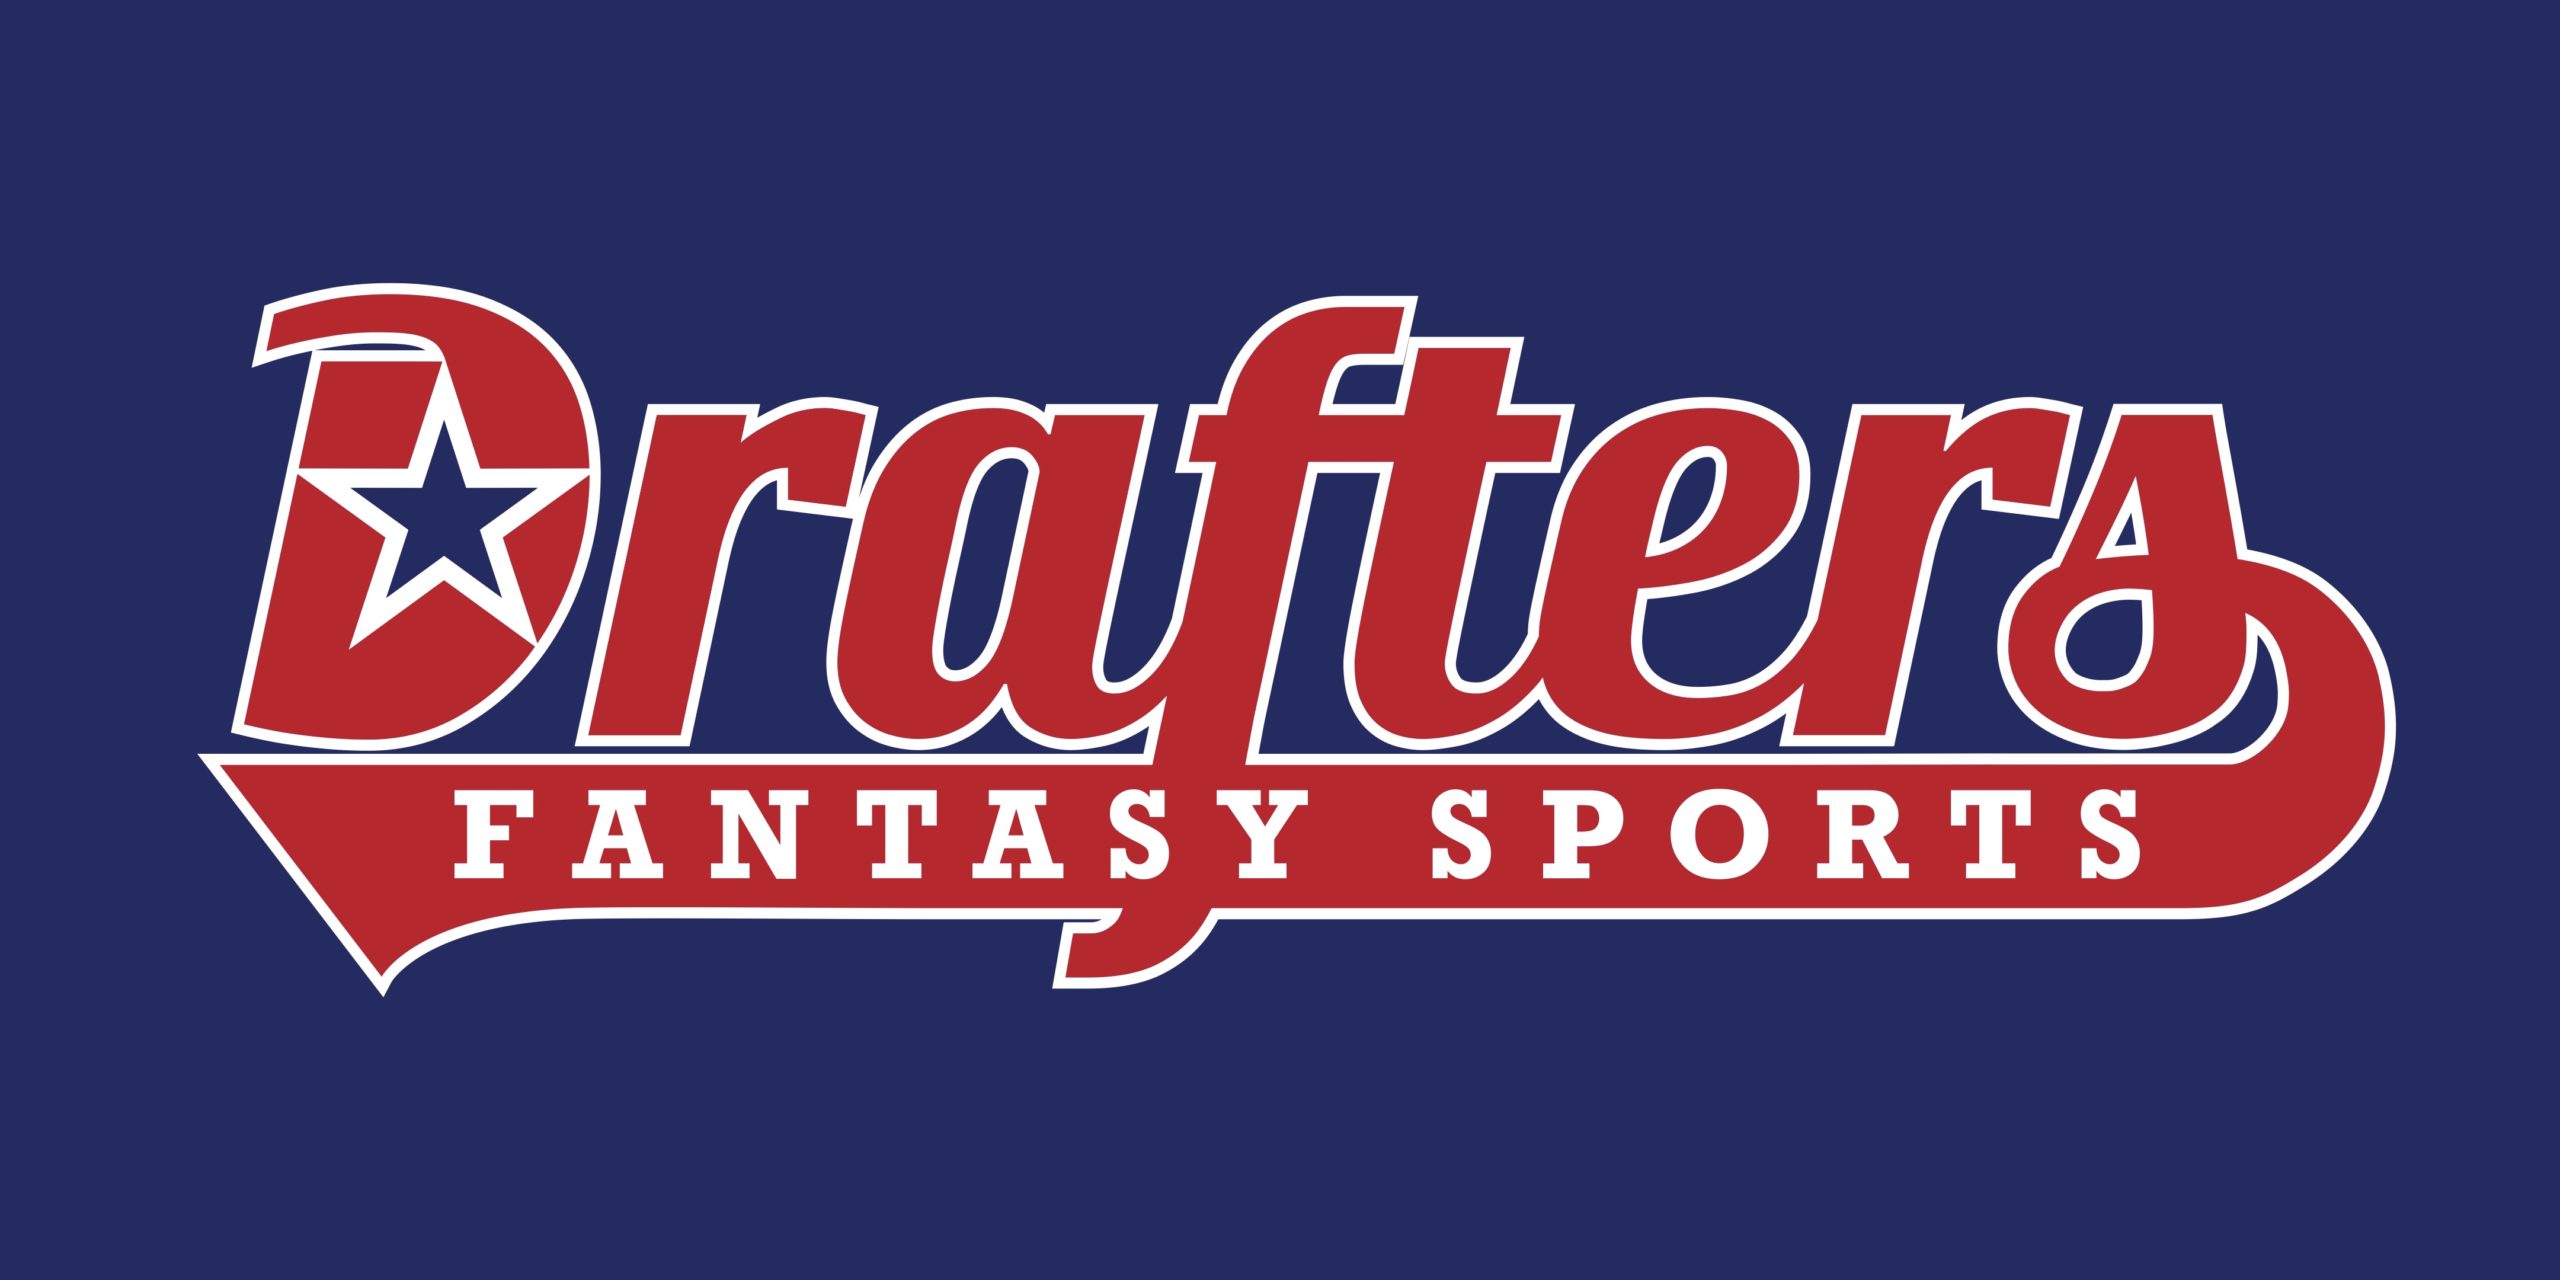 Drafters Fantasy Sports